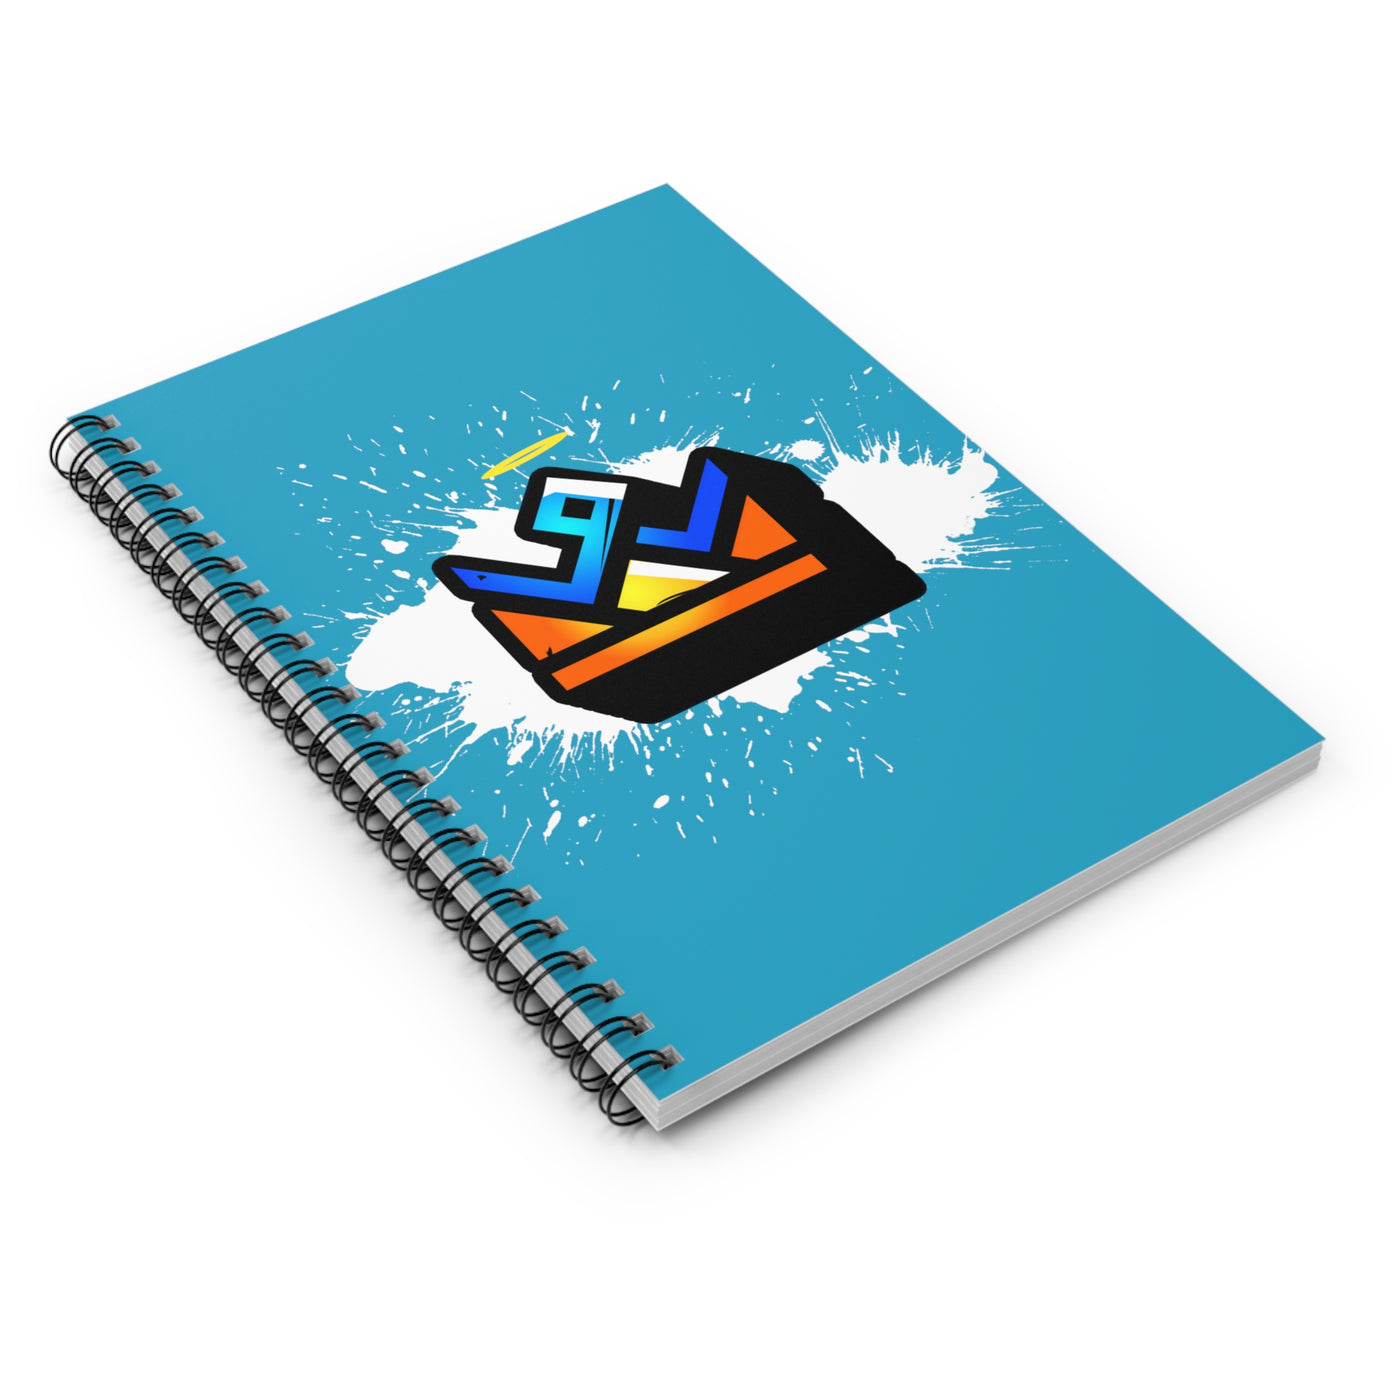 Colorful Crown Spiral Notebook (Turquoise)